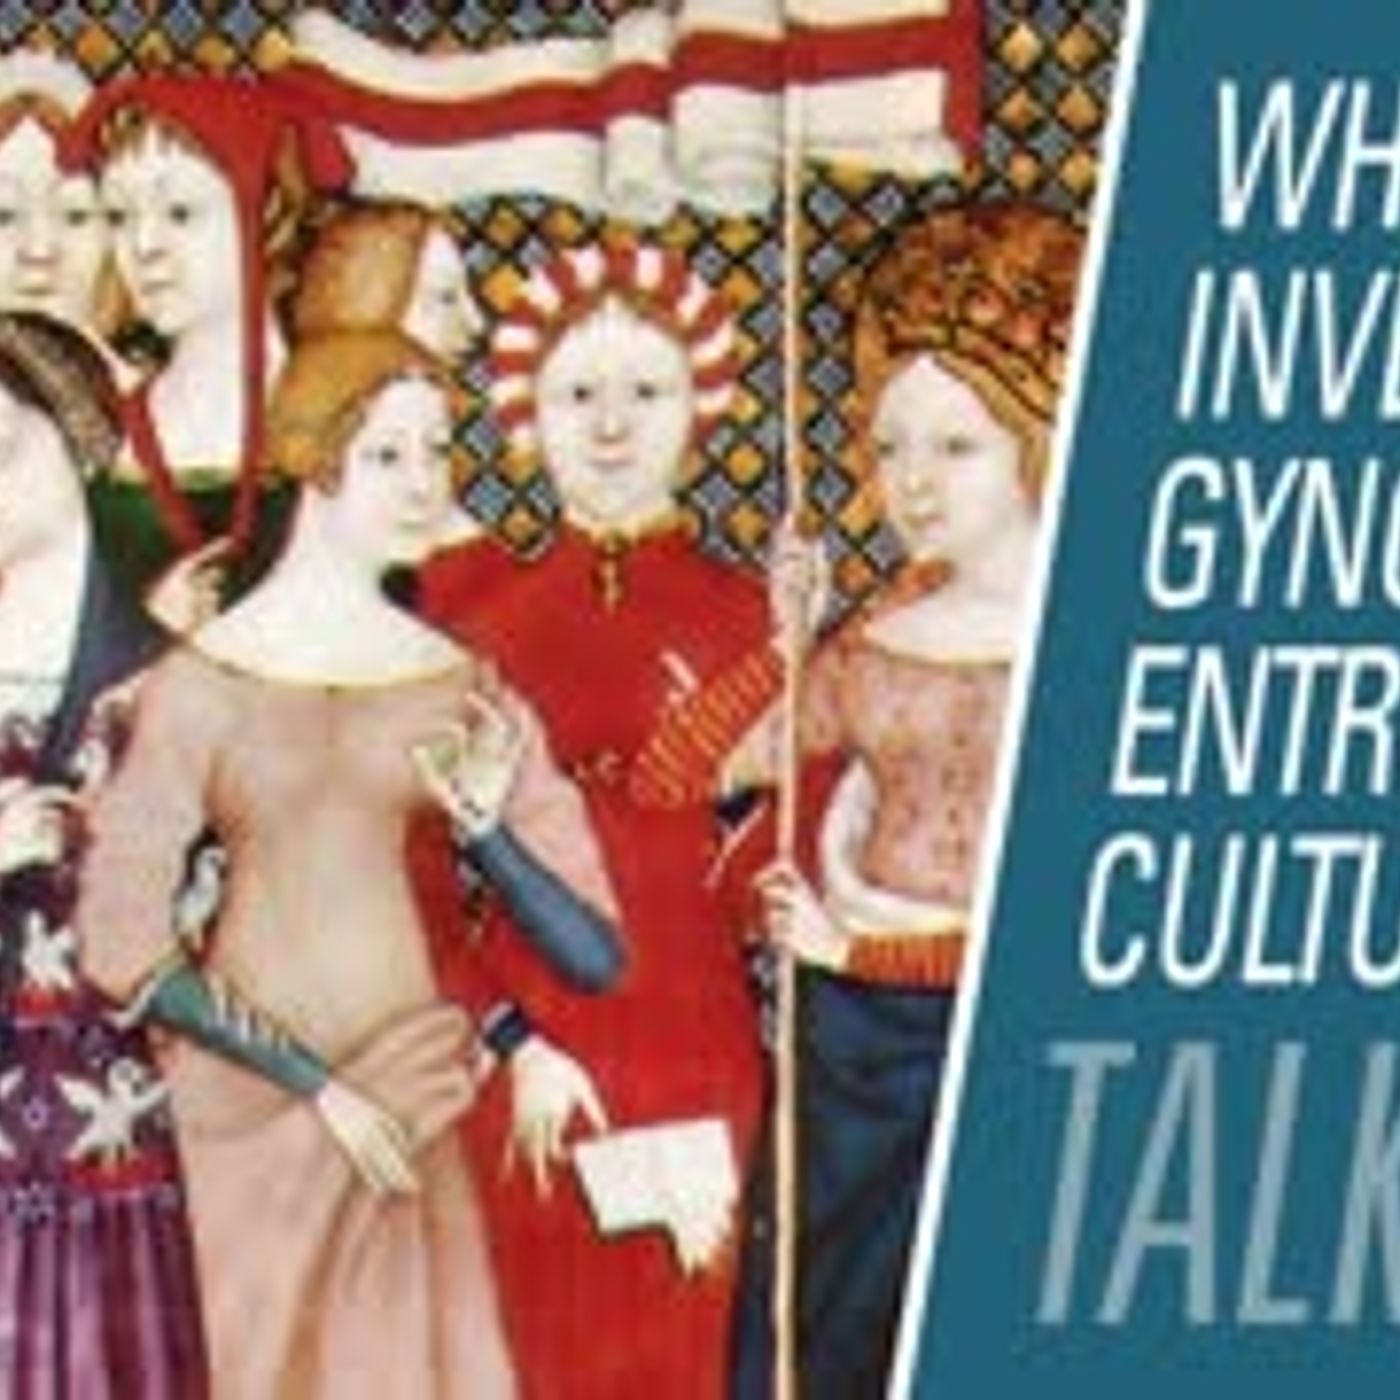 Who invented gynocentric culture | HBR Talk 306